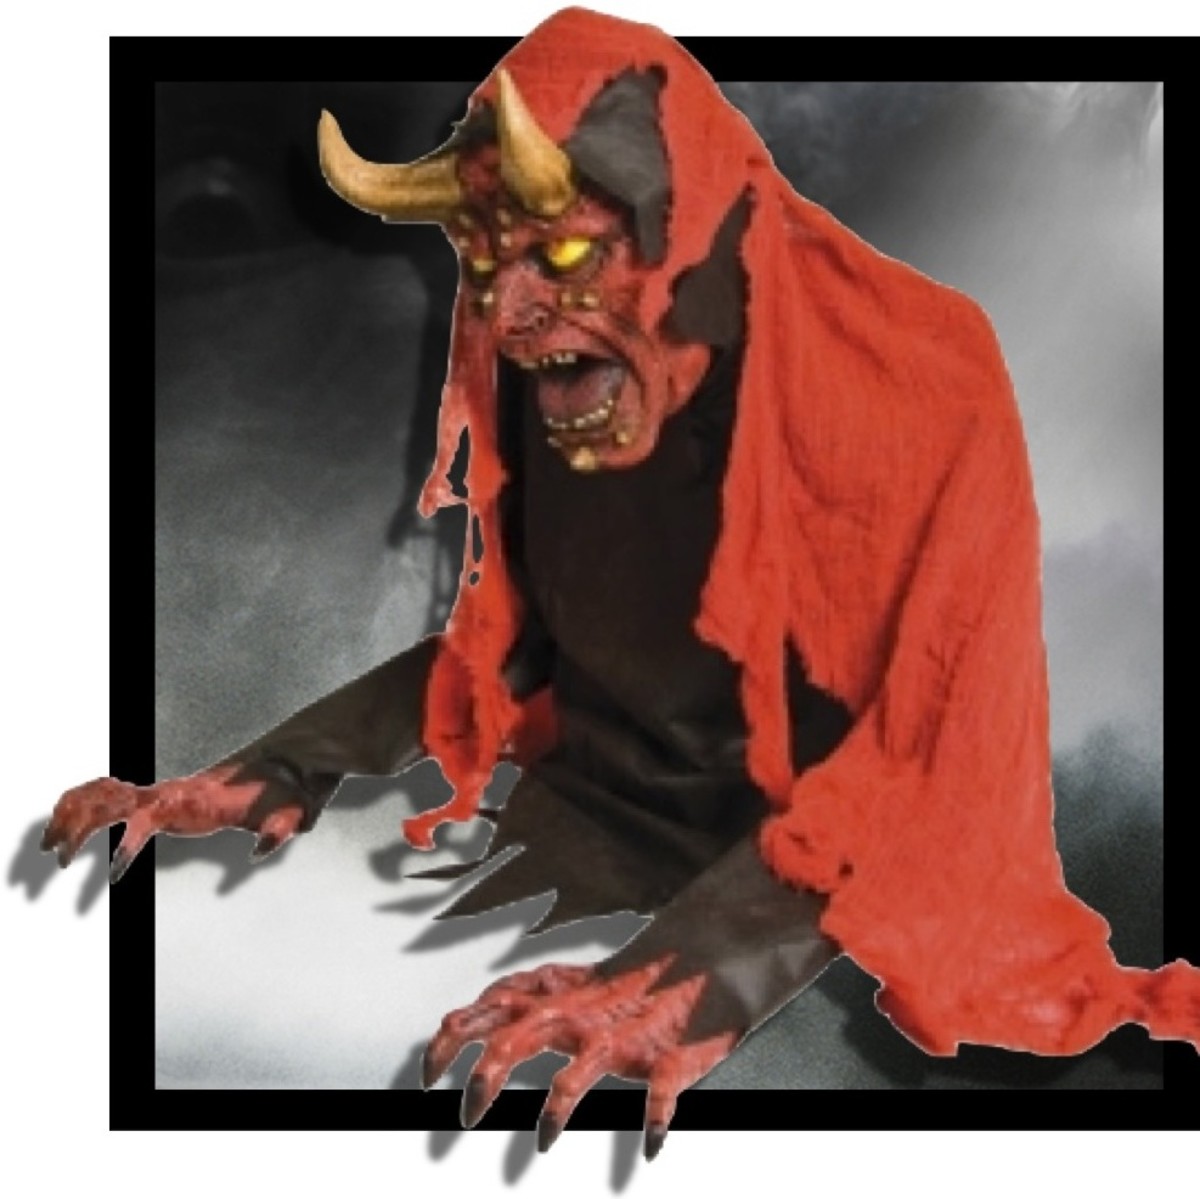 Demented Devil Animated Prop is Featured Below. Scroll down for information.